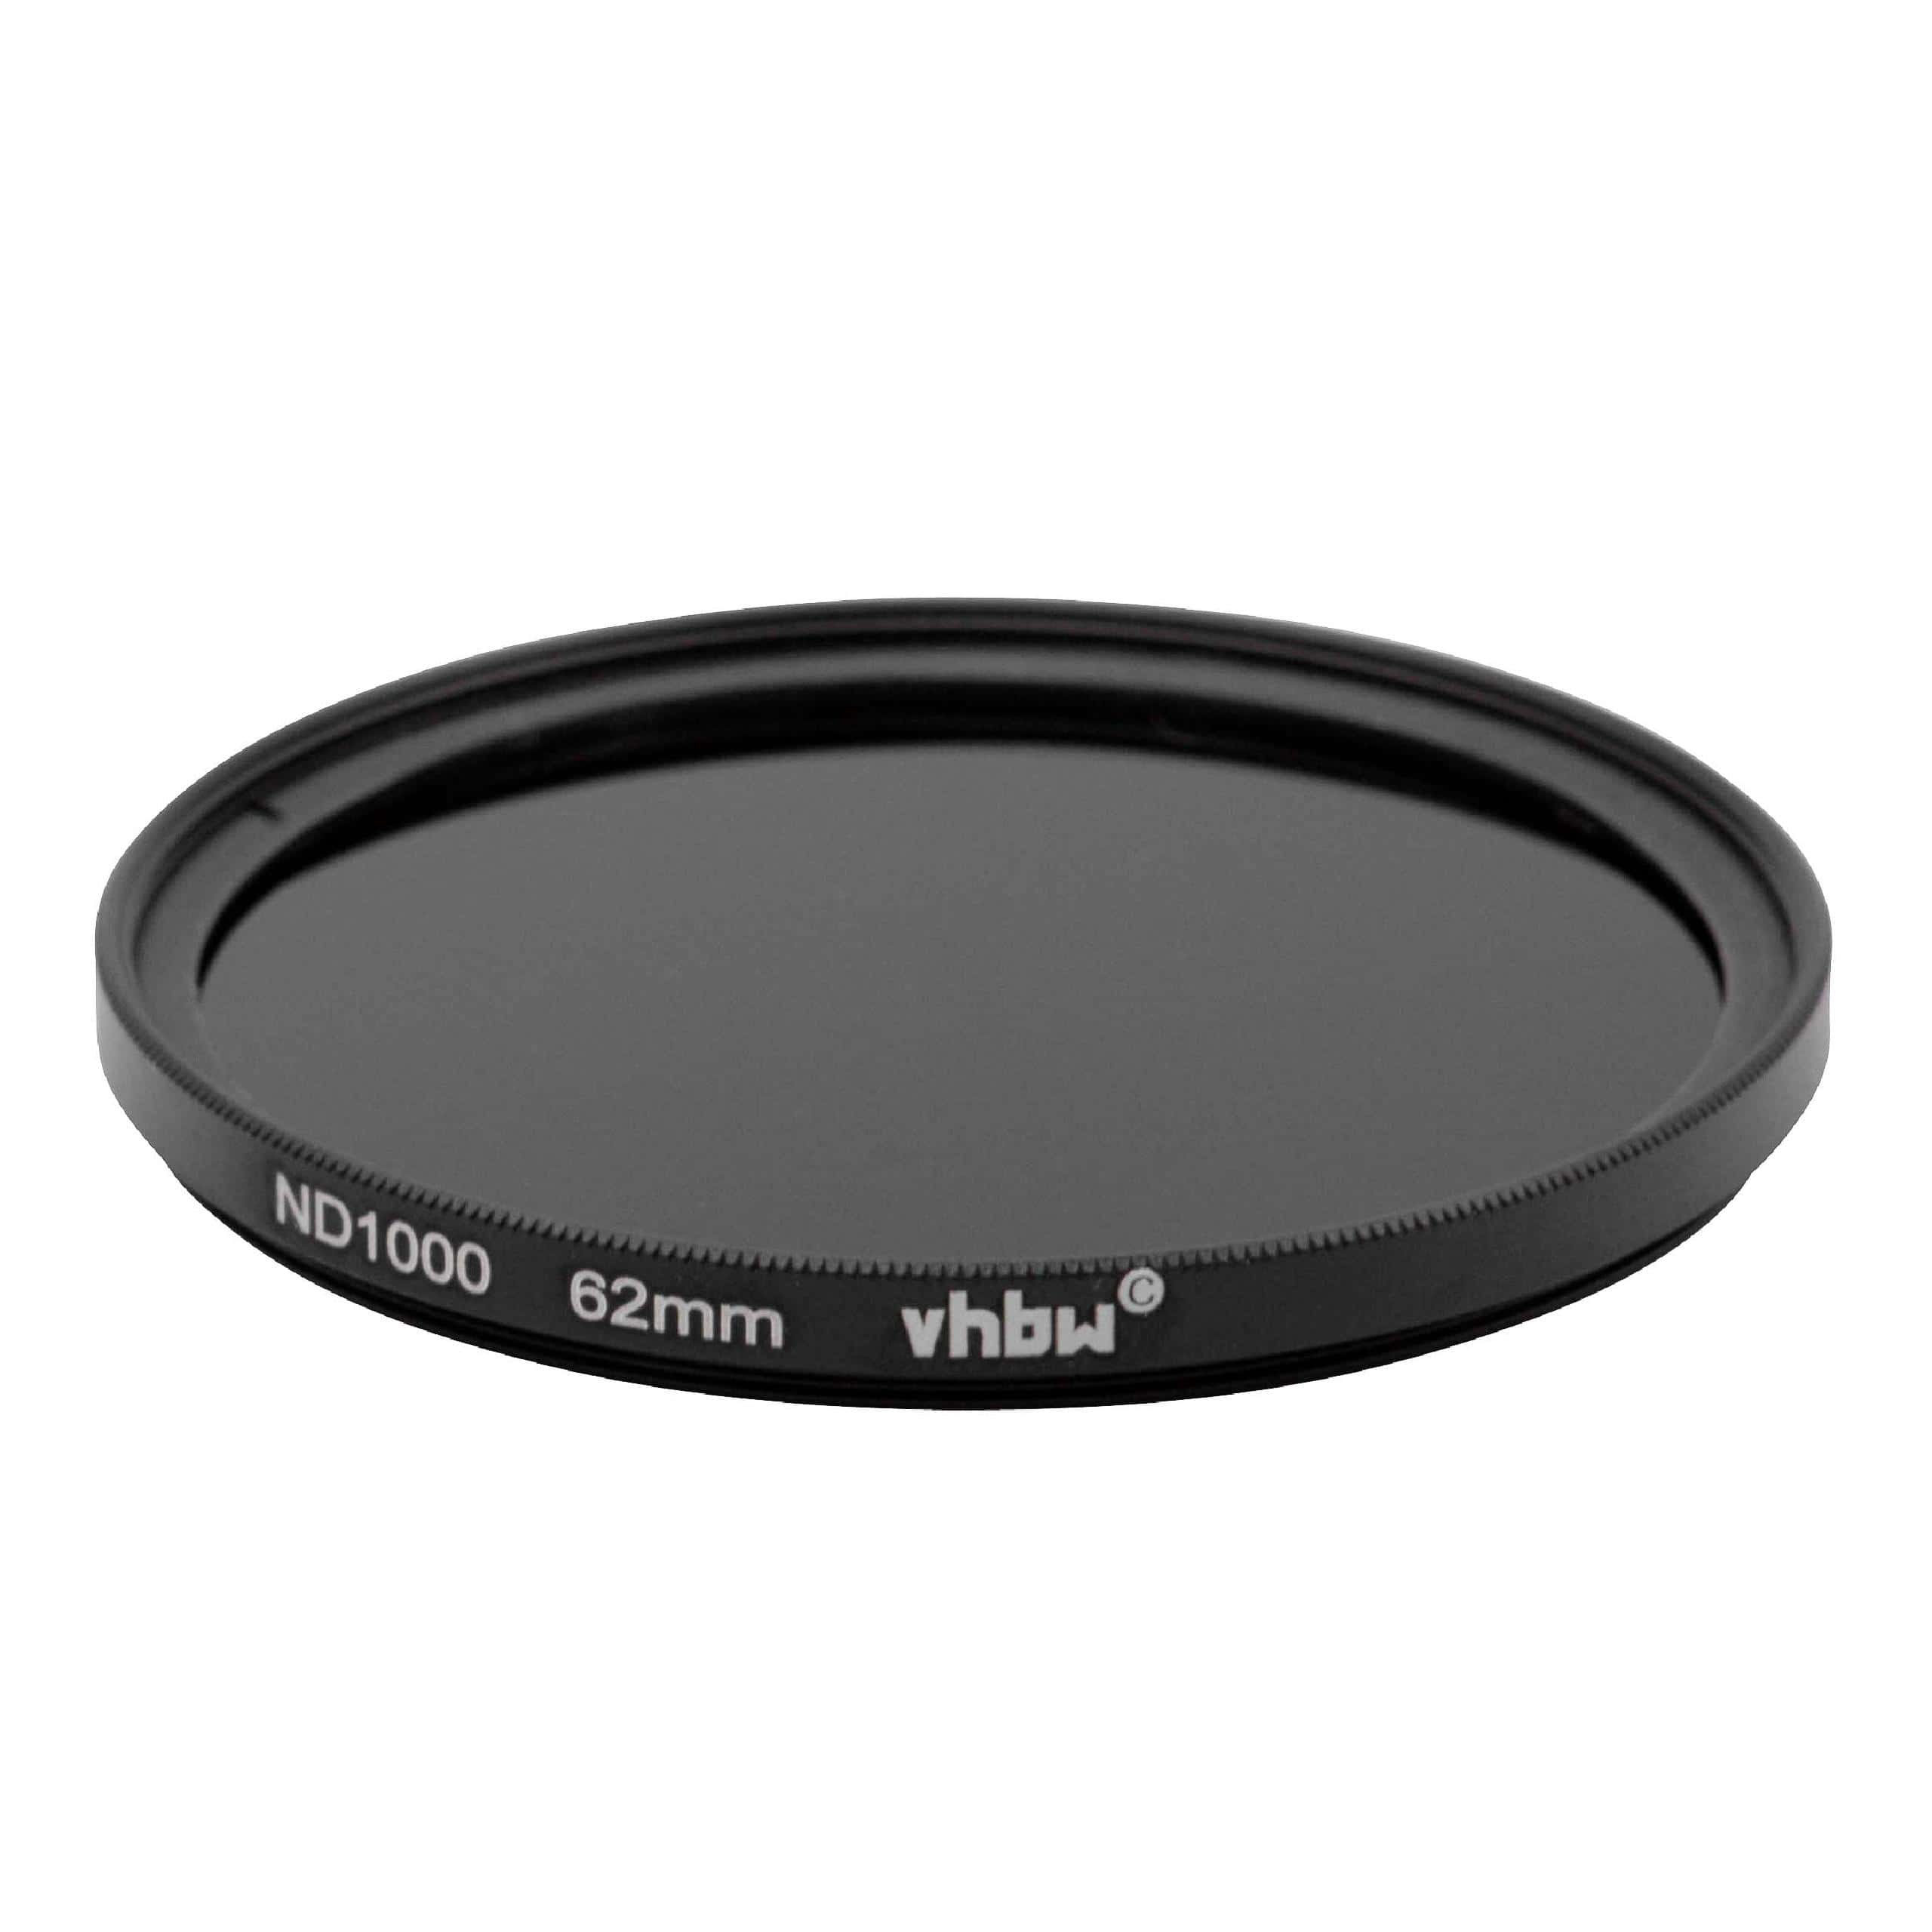 Universal ND Filter ND 1000 suitable for Camera Lenses with 62 mm Filter Thread - Grey Filter